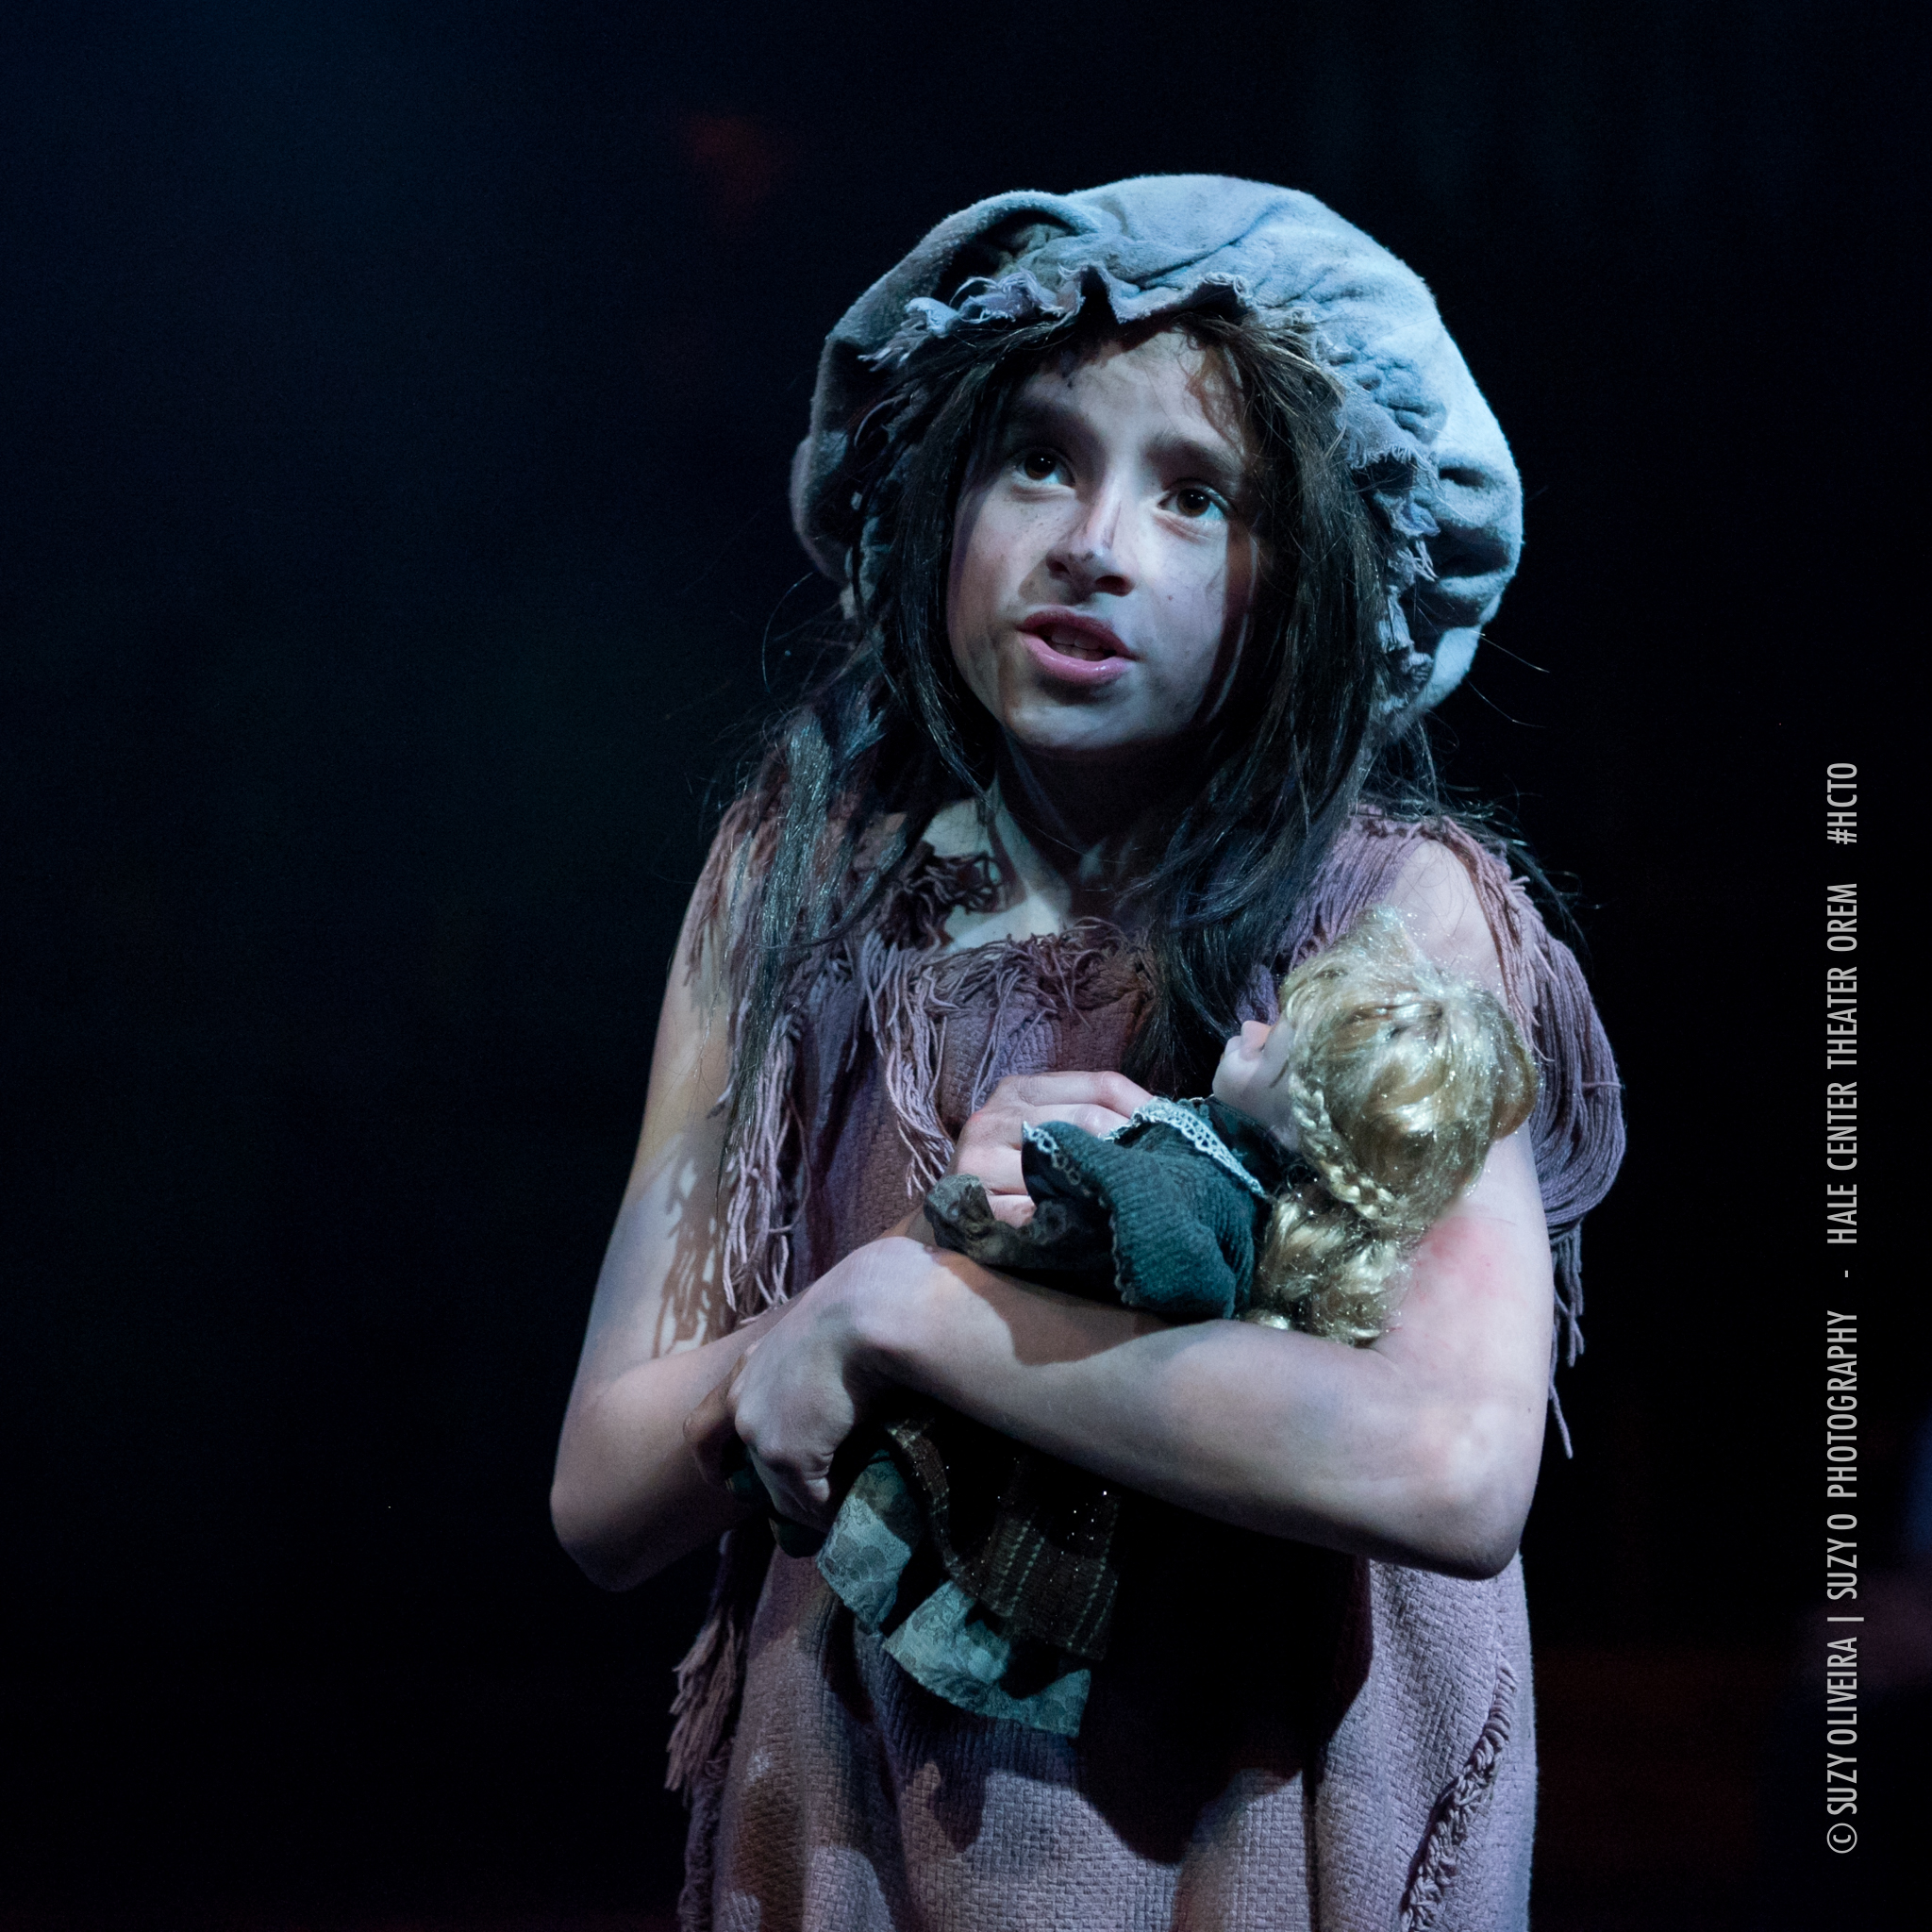 Reese Oliveira as Young Cosette